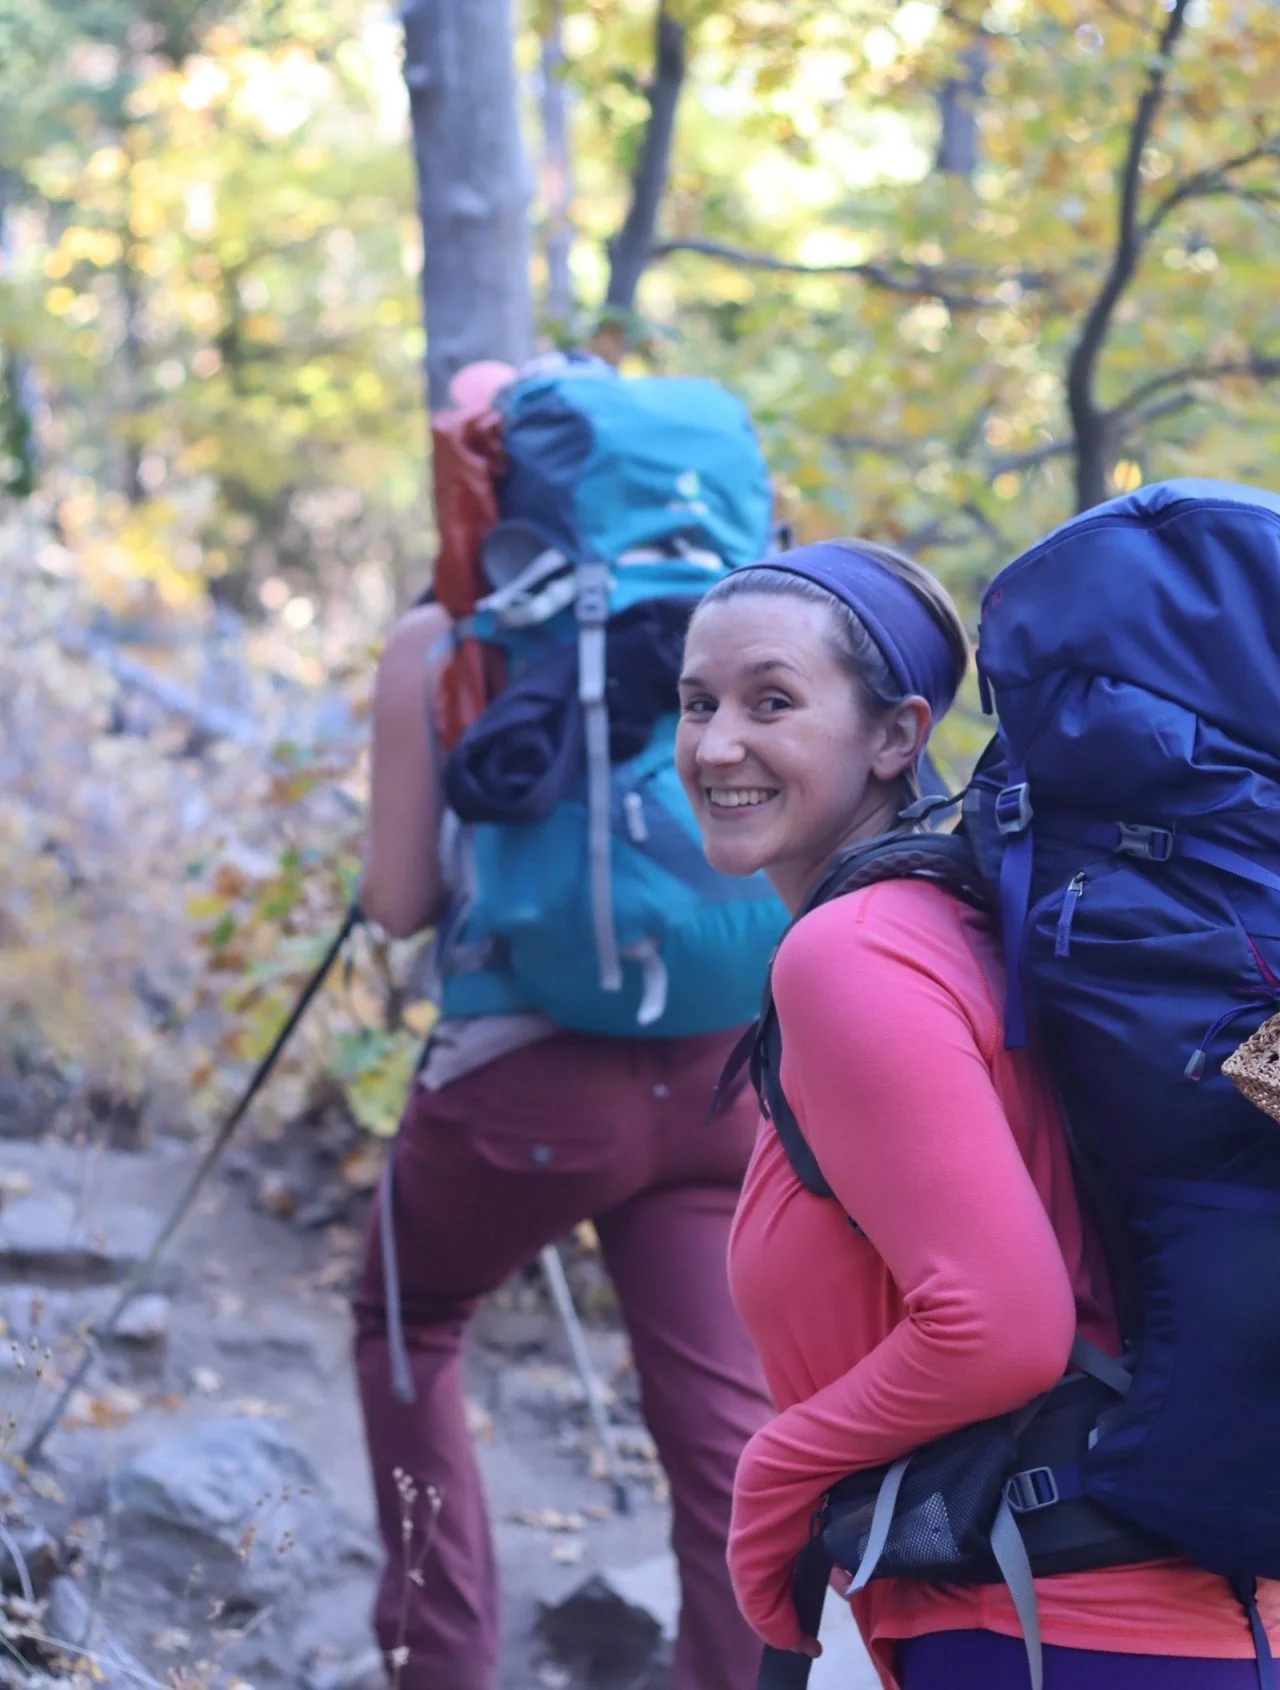 backpacking safety tips